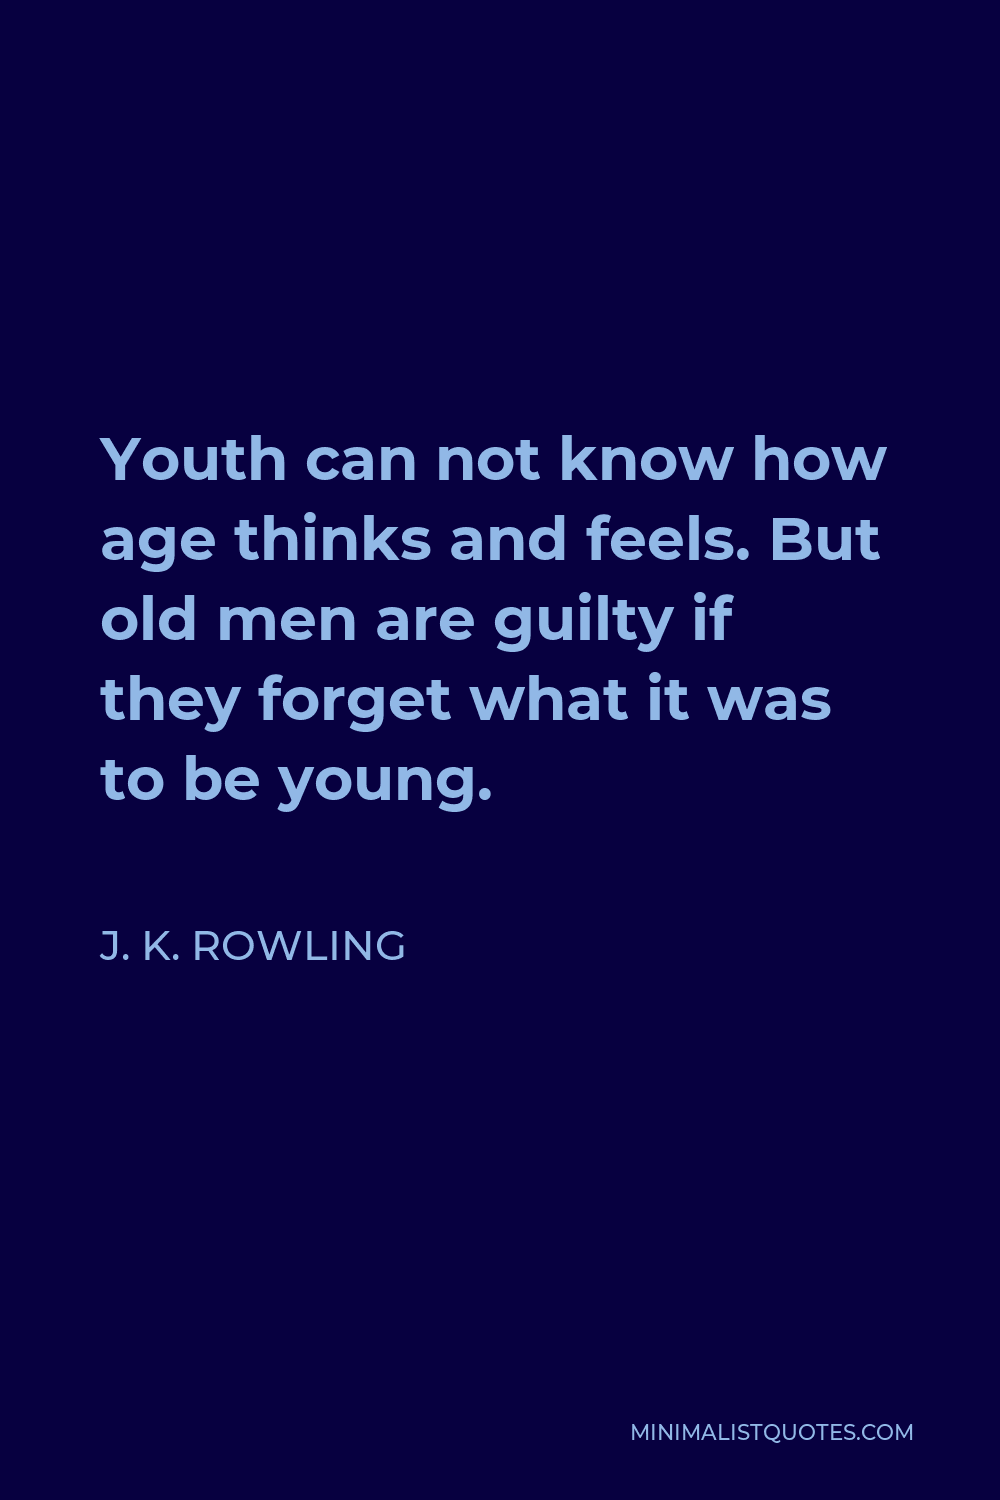 J. K. Rowling Quote - Youth can not know how age thinks and feels. But old men are guilty if they forget what it was to be young.